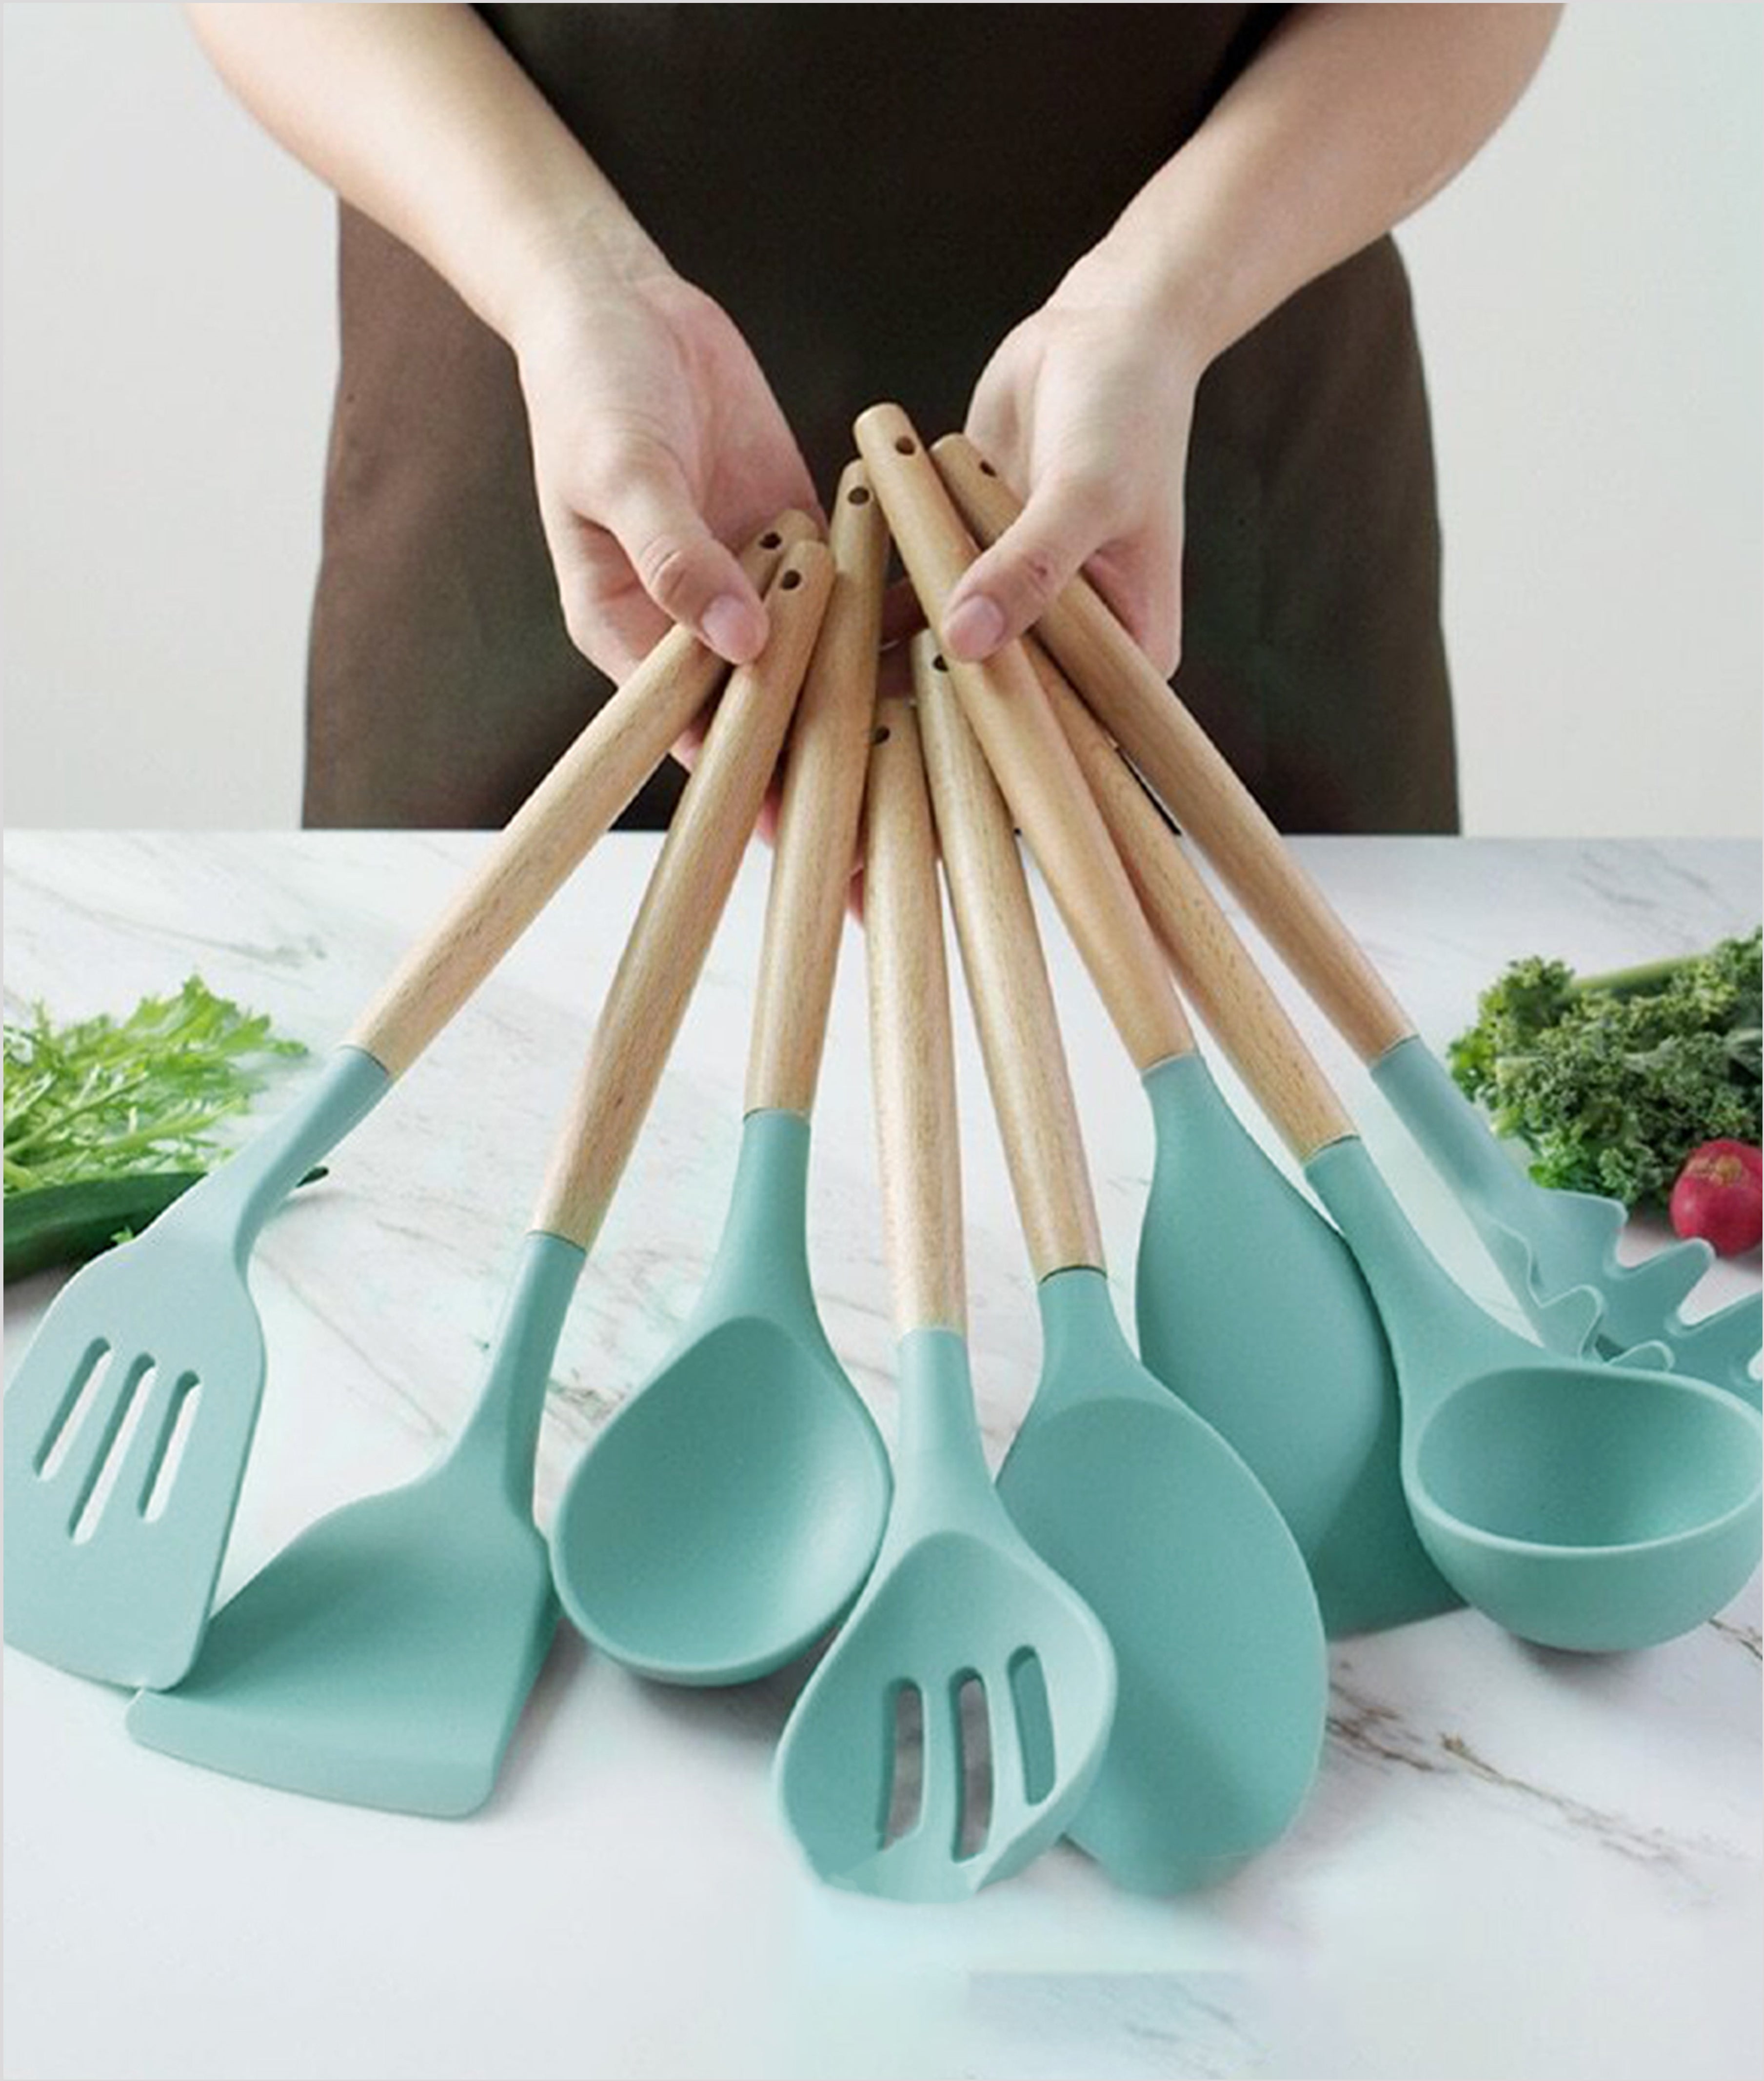 Silicone Utensils Kitchen Cooking Set with Wooden Bamboo Handles for Nonstick Cookware Non-Toxic, Non-Stick Safe & BPA-Free